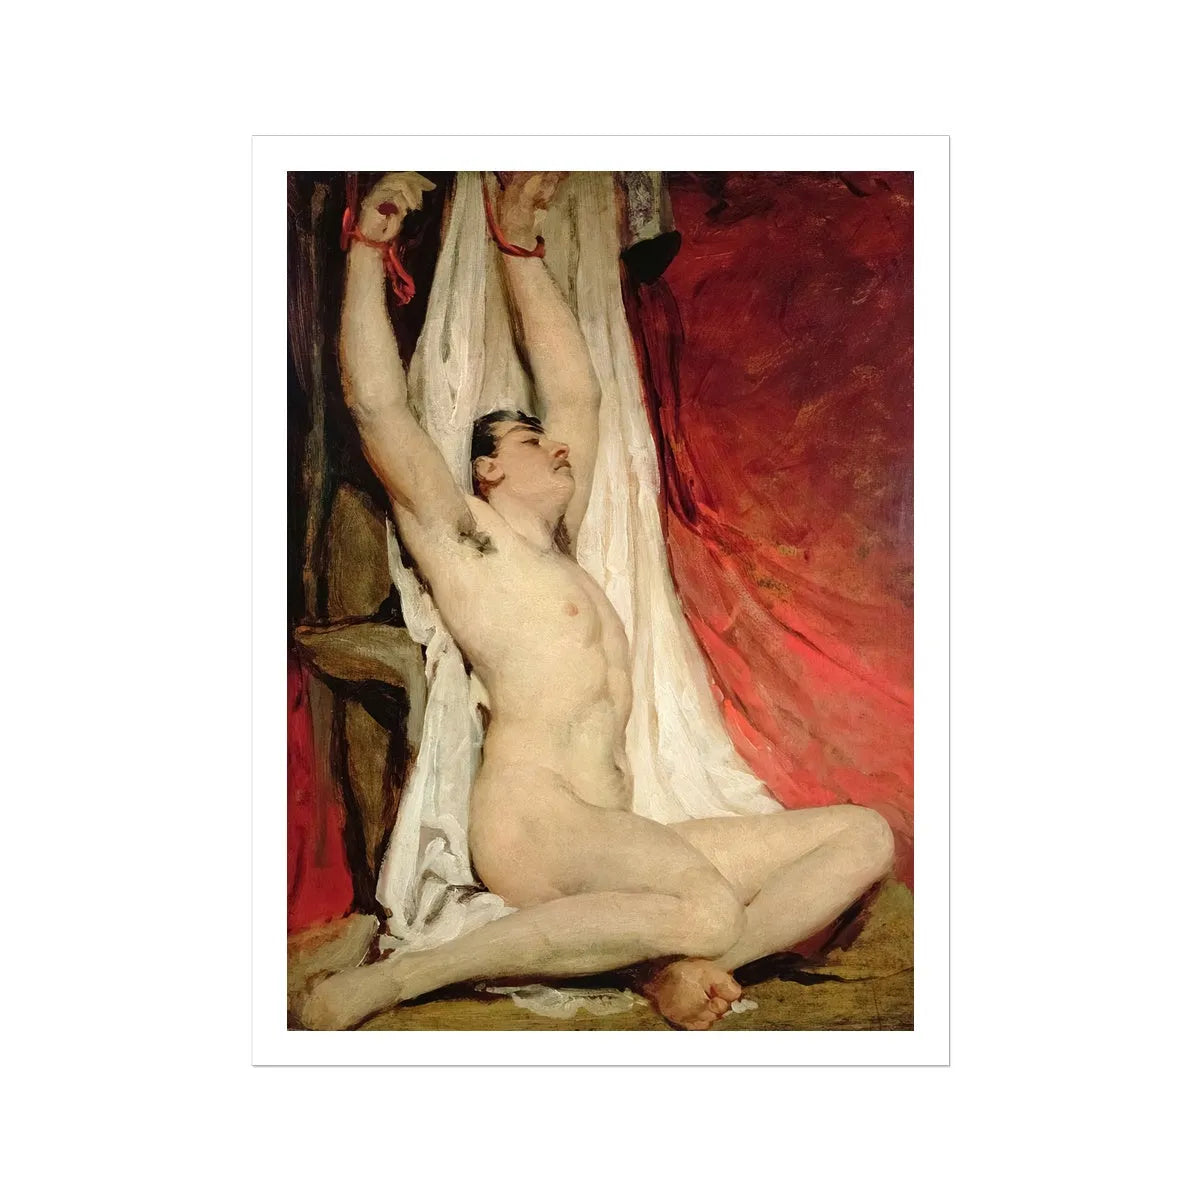 Male Nude Arms Up-stretched - William Etty Gay Art Print - Posters Prints & Visual Artwork - Aesthetic Art